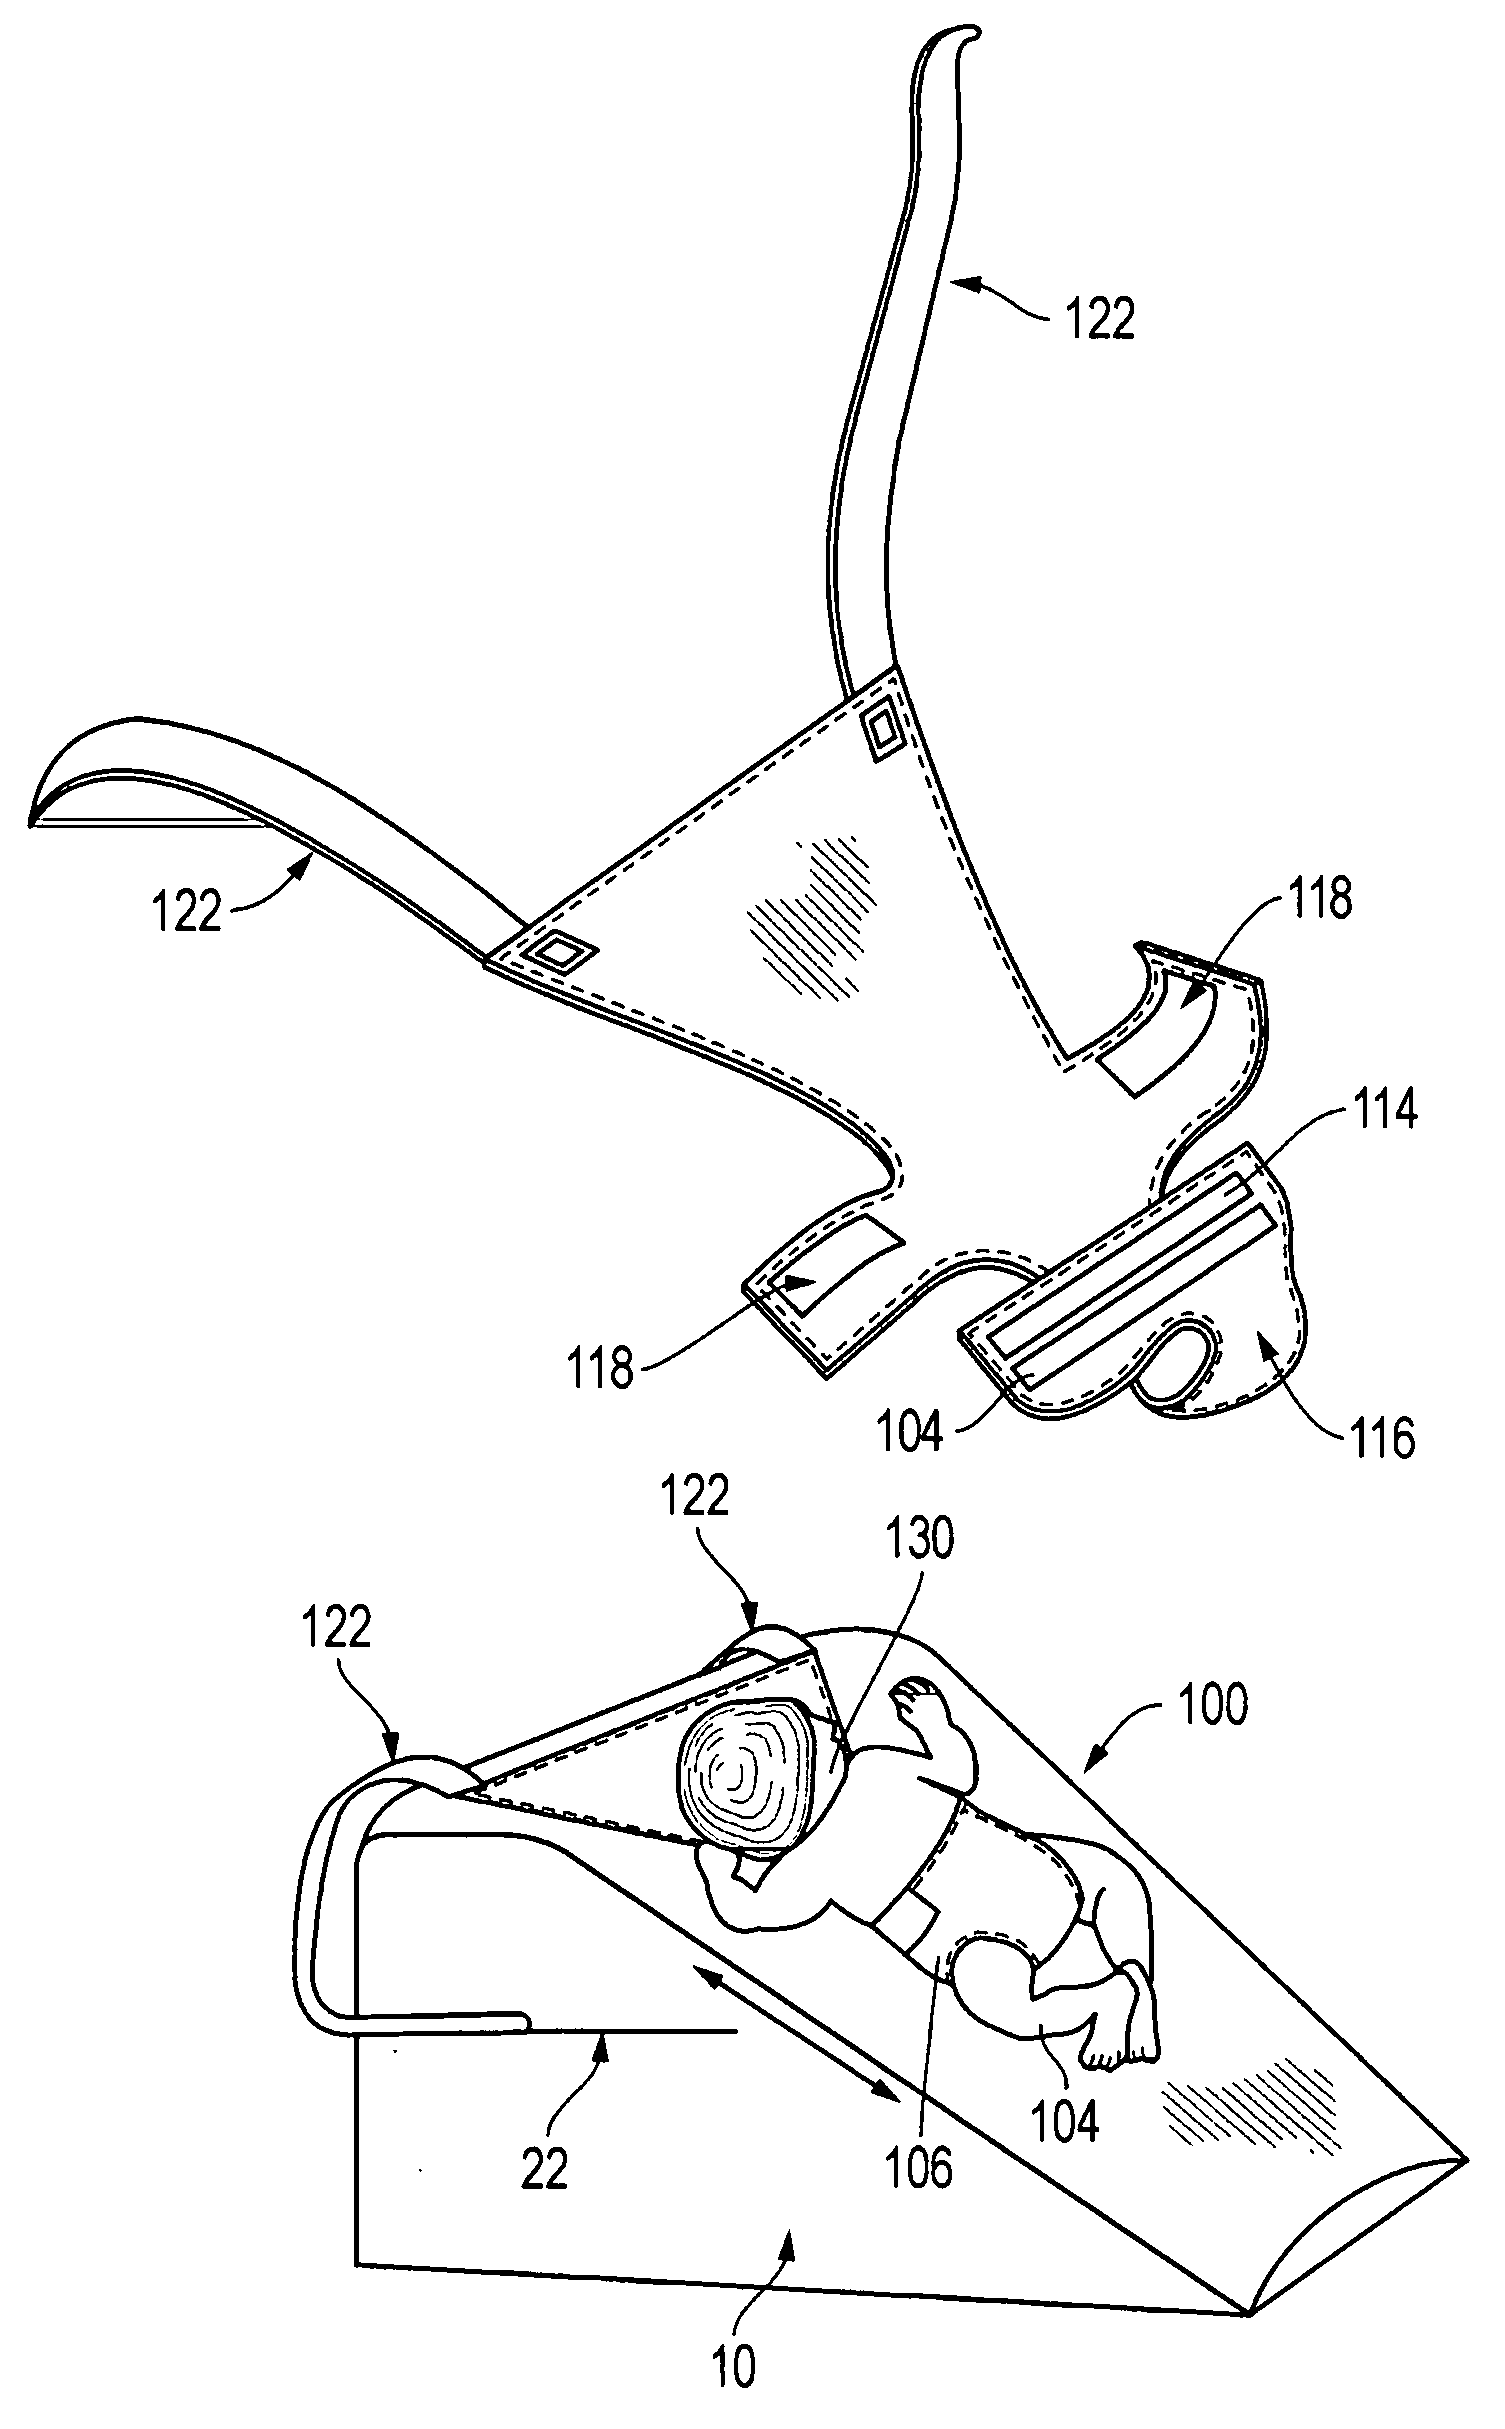 Harness for securing an infant to reflux wedge